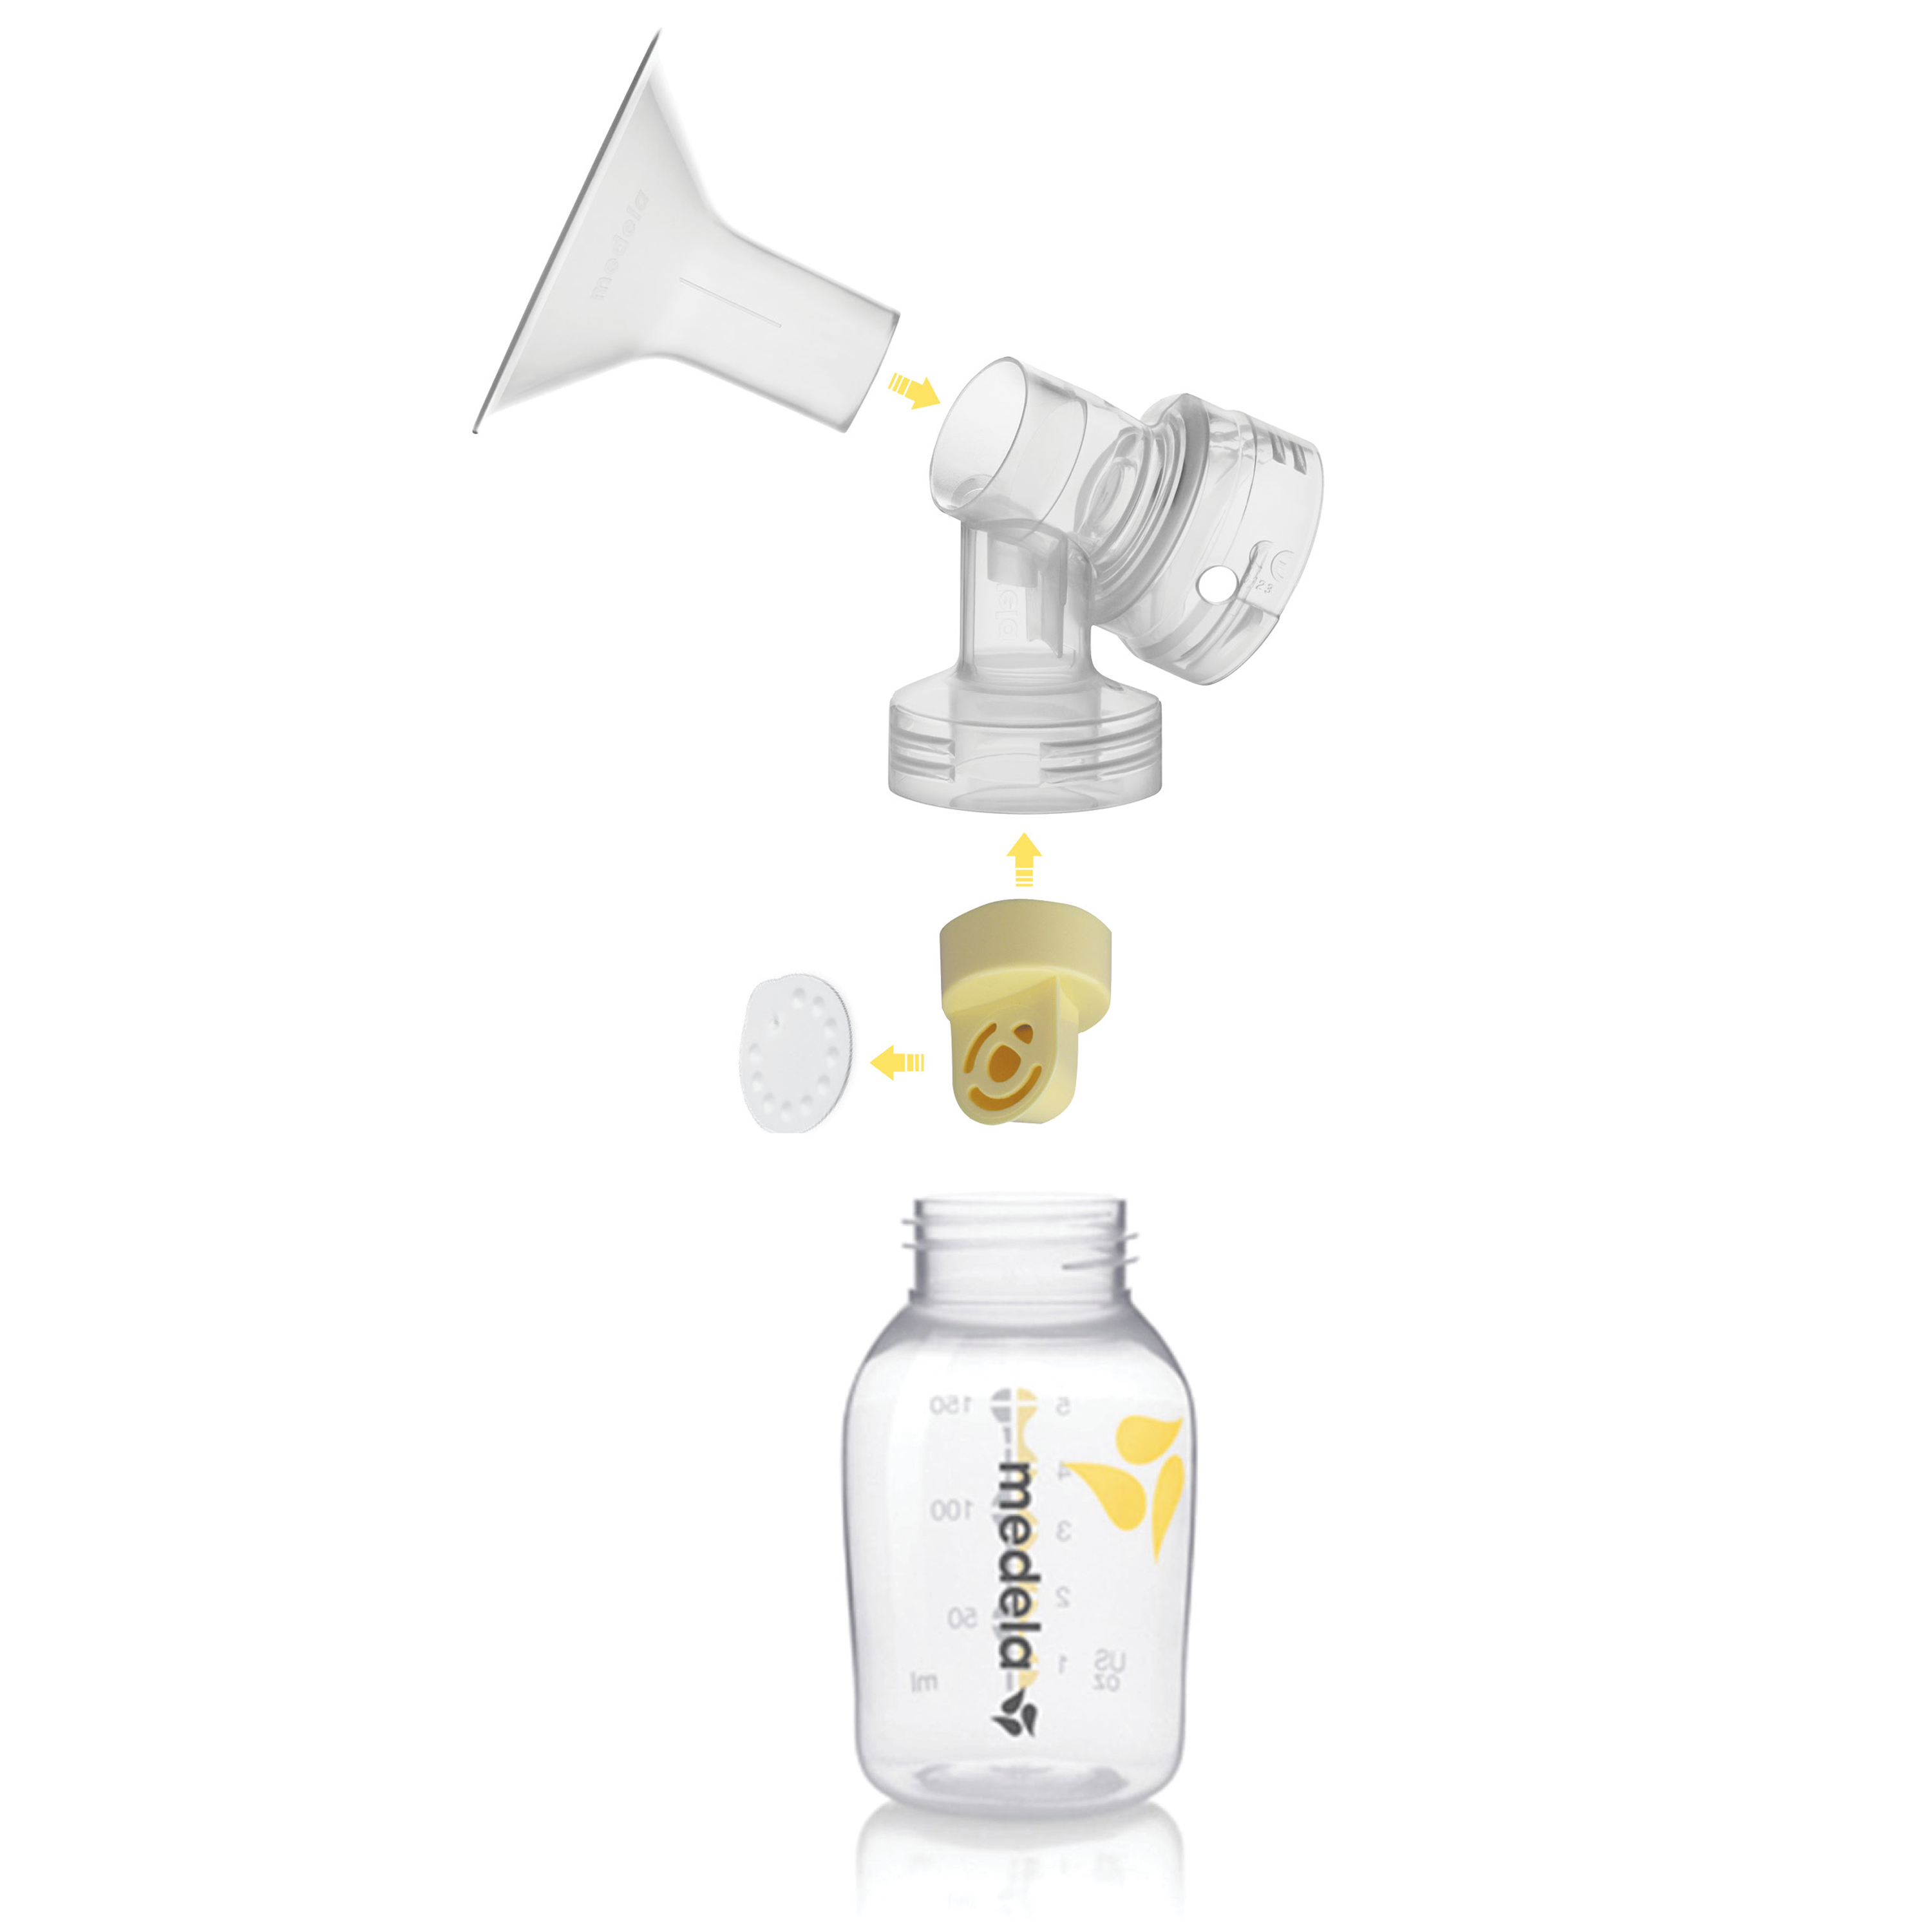 Medela Pump In Style Advanced Breast Pump with On-the-go Tote with International Adapter - image 4 of 9